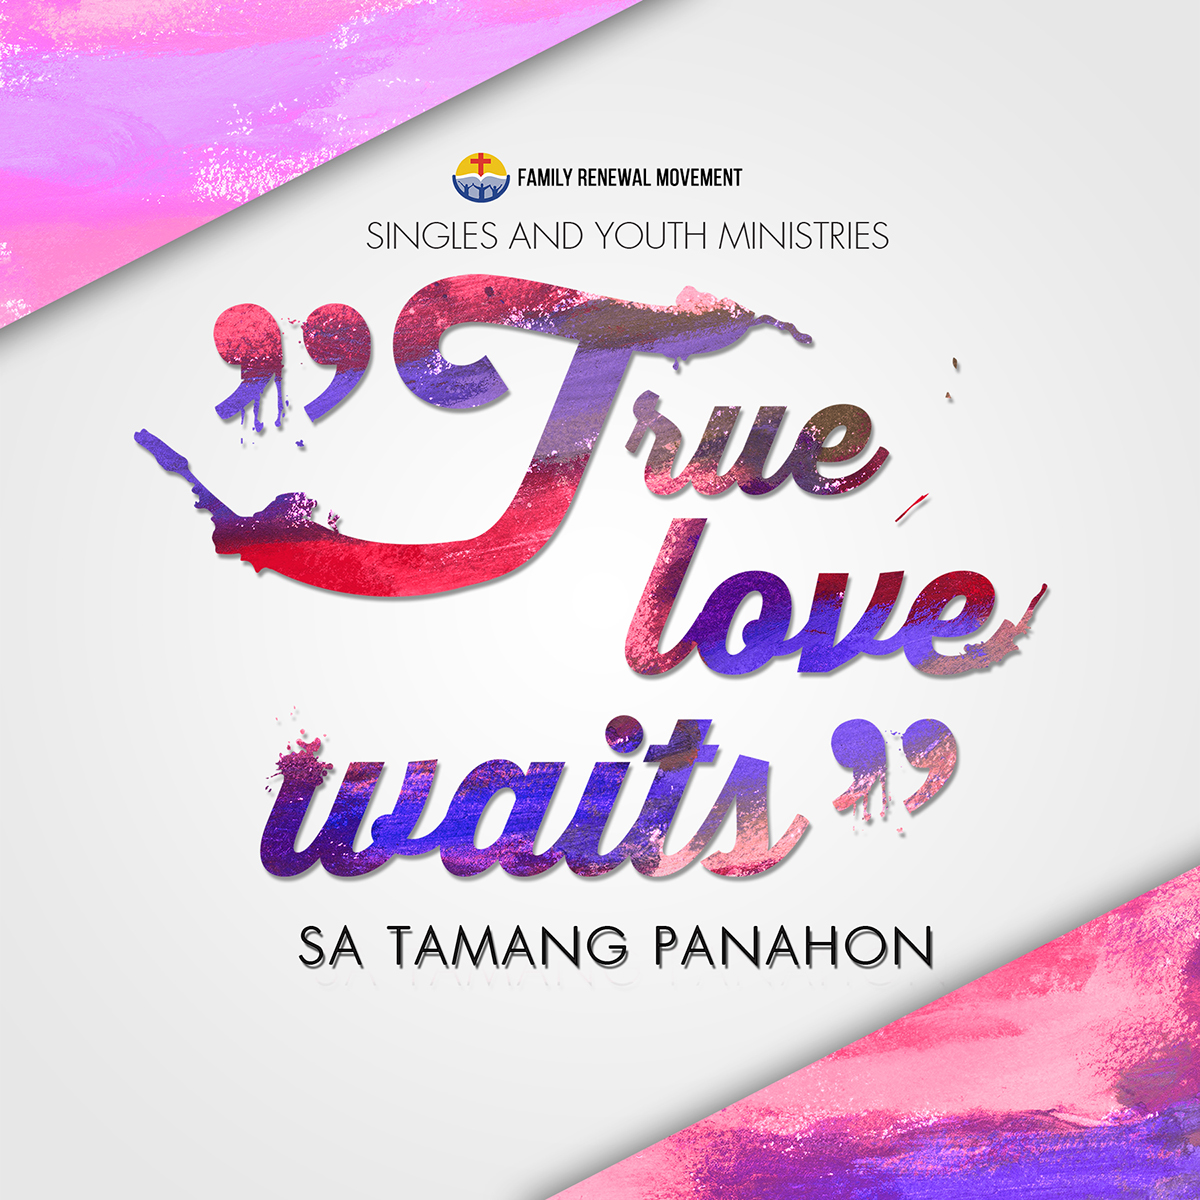 true Love waits poster Layout